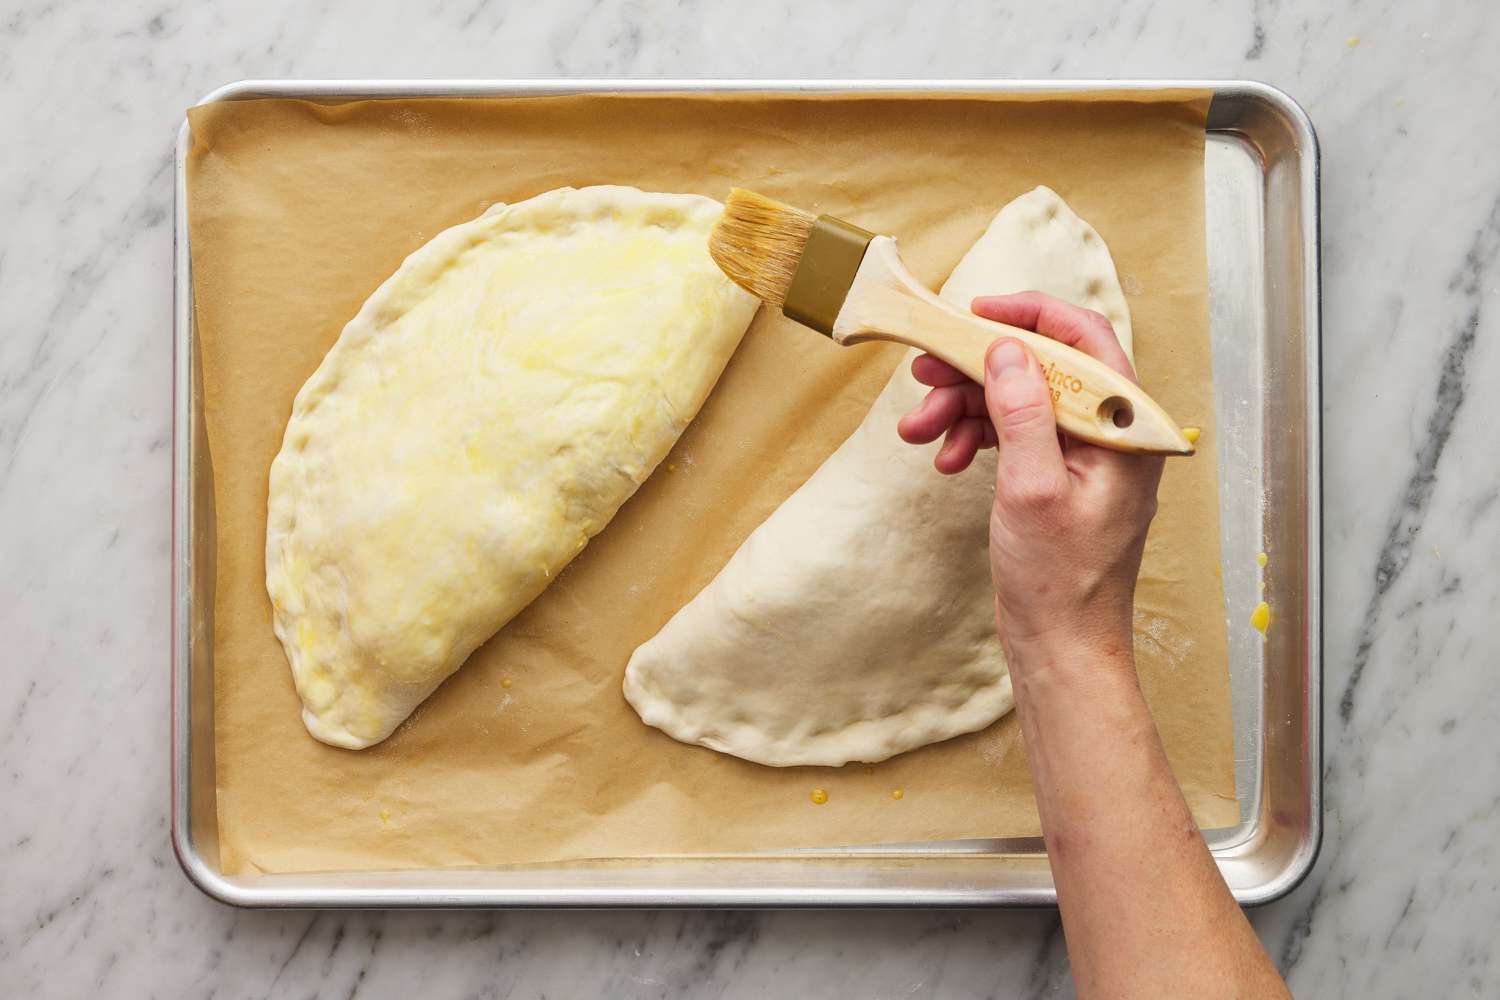 brushing egg wash with a pastry brush on two filled and folded calzones before baking